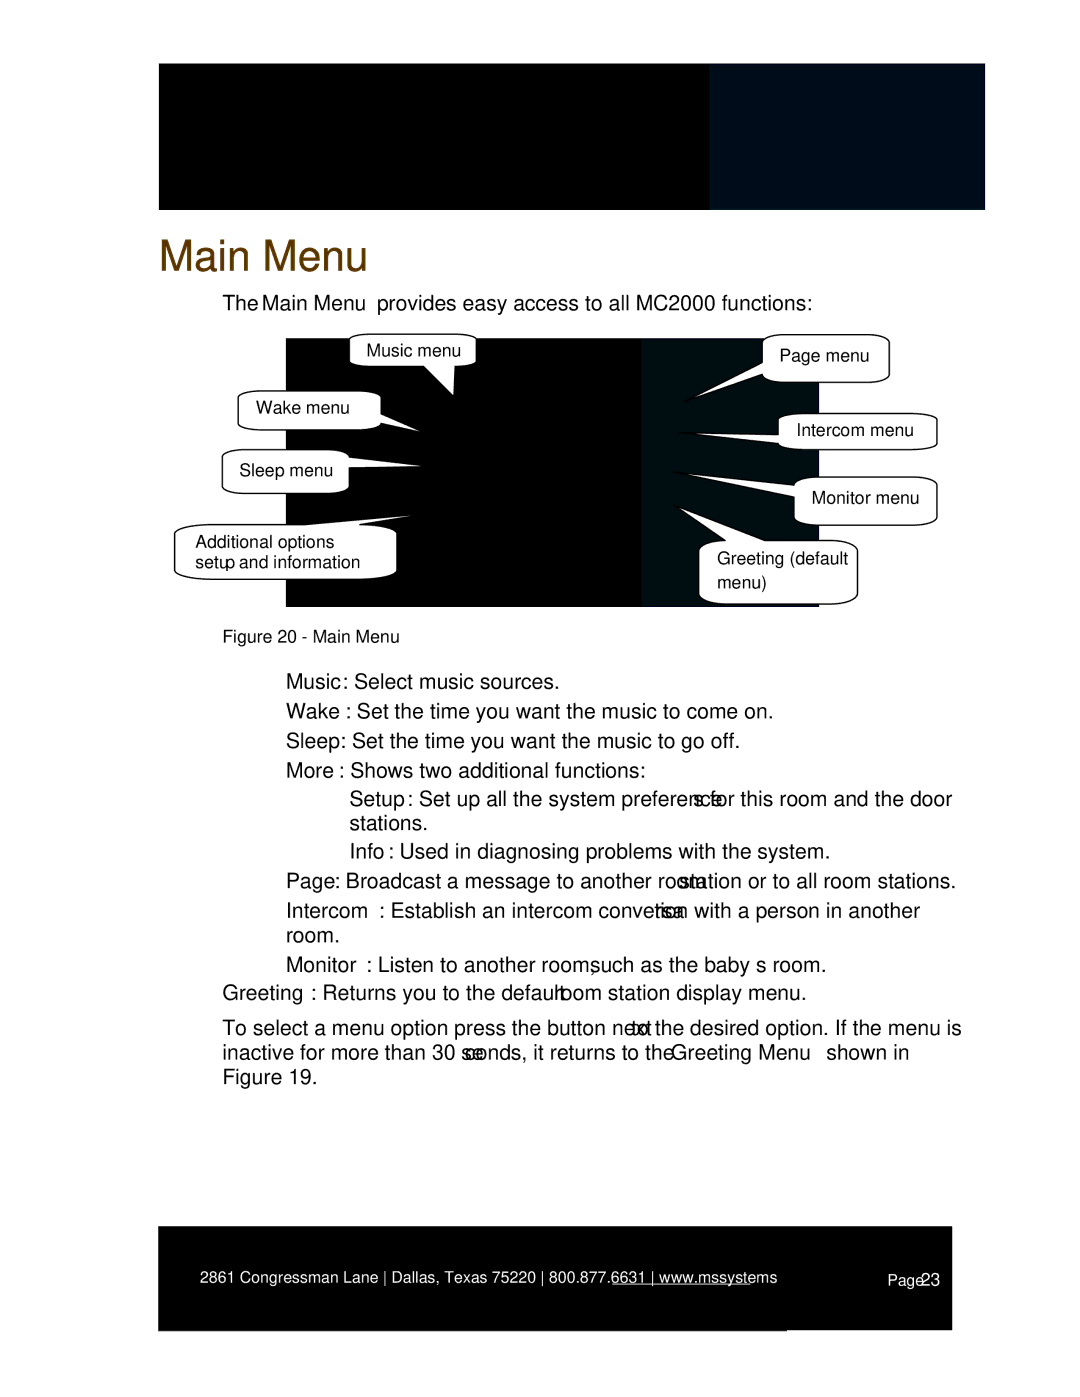 M&S Systems owner manual Main Menu provides easy access to all MC2000 functions 